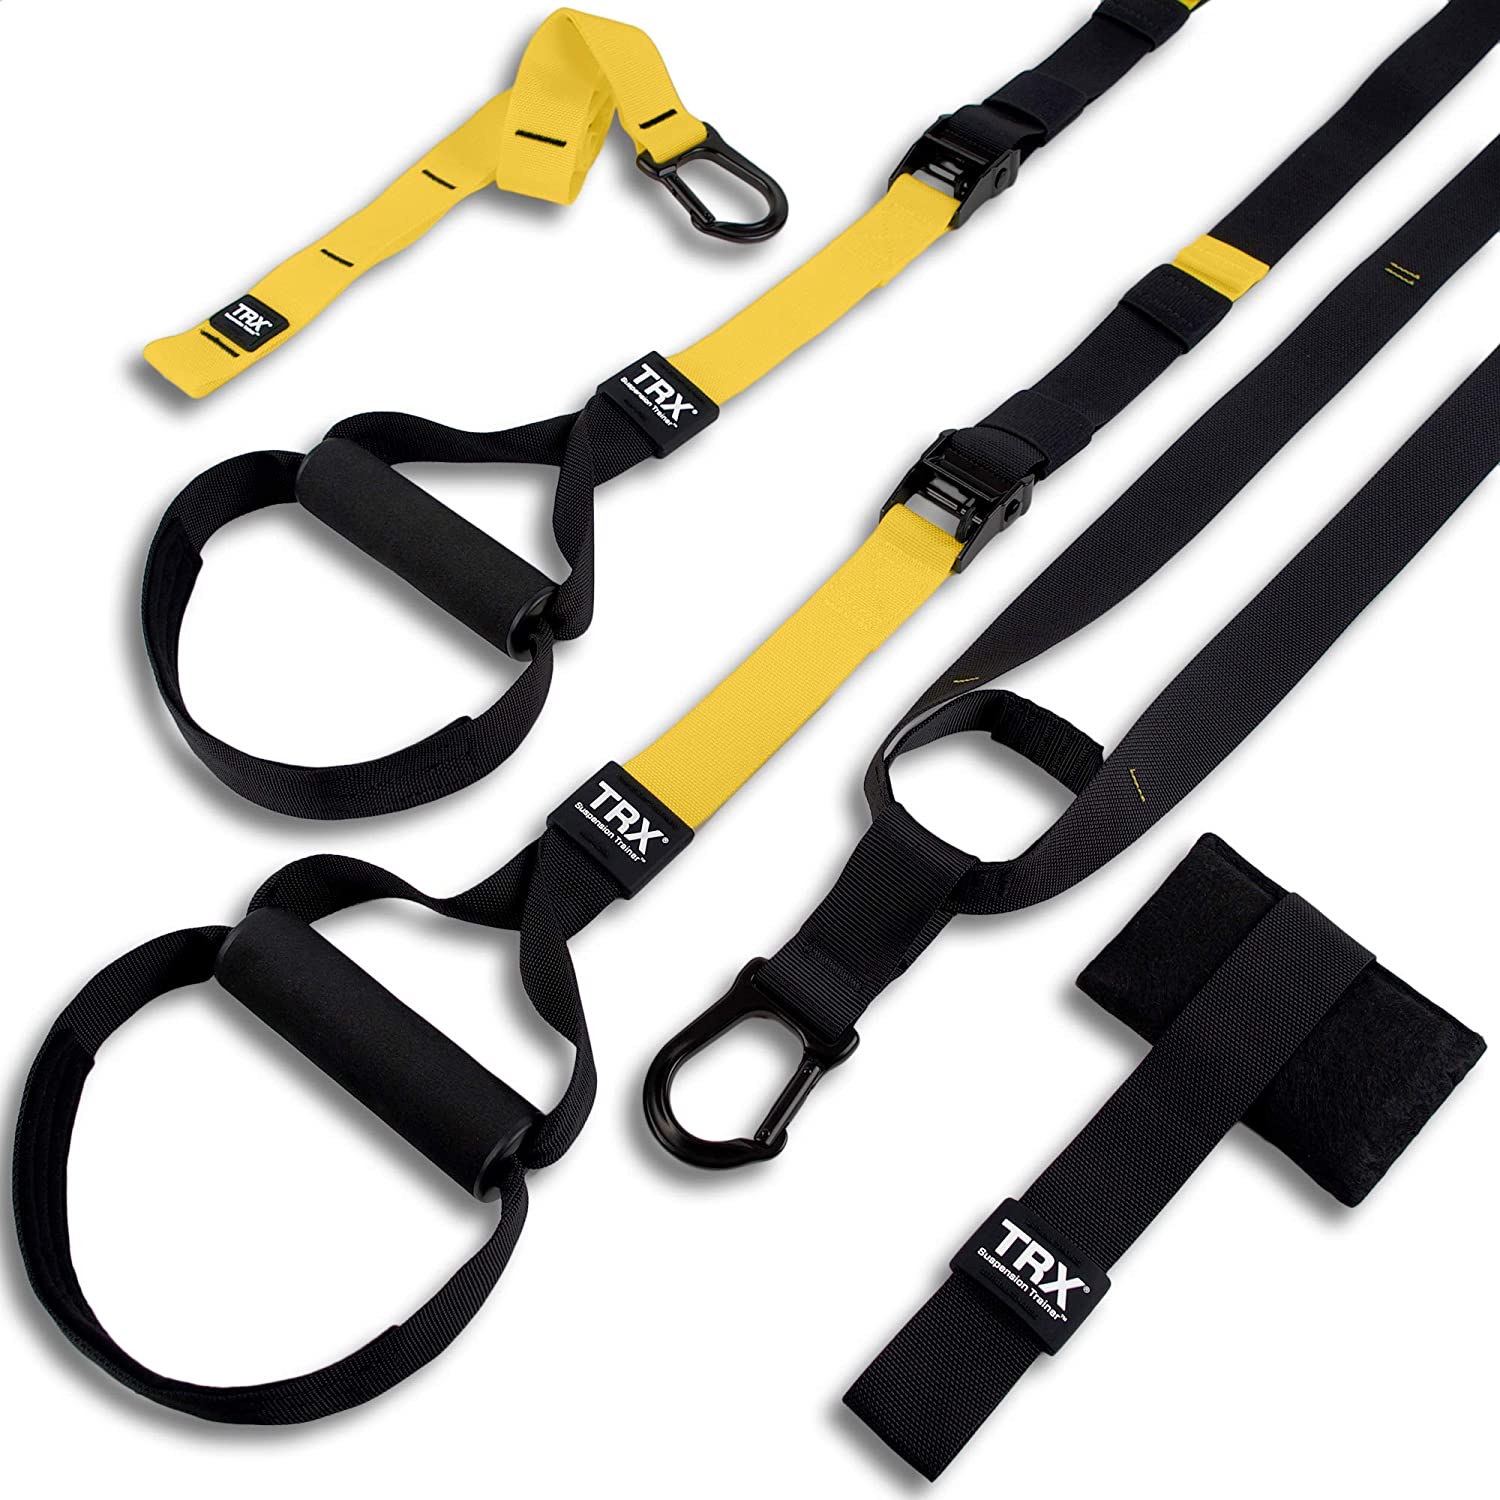 The Benefits of TRX Suspension Trainers - The Manual